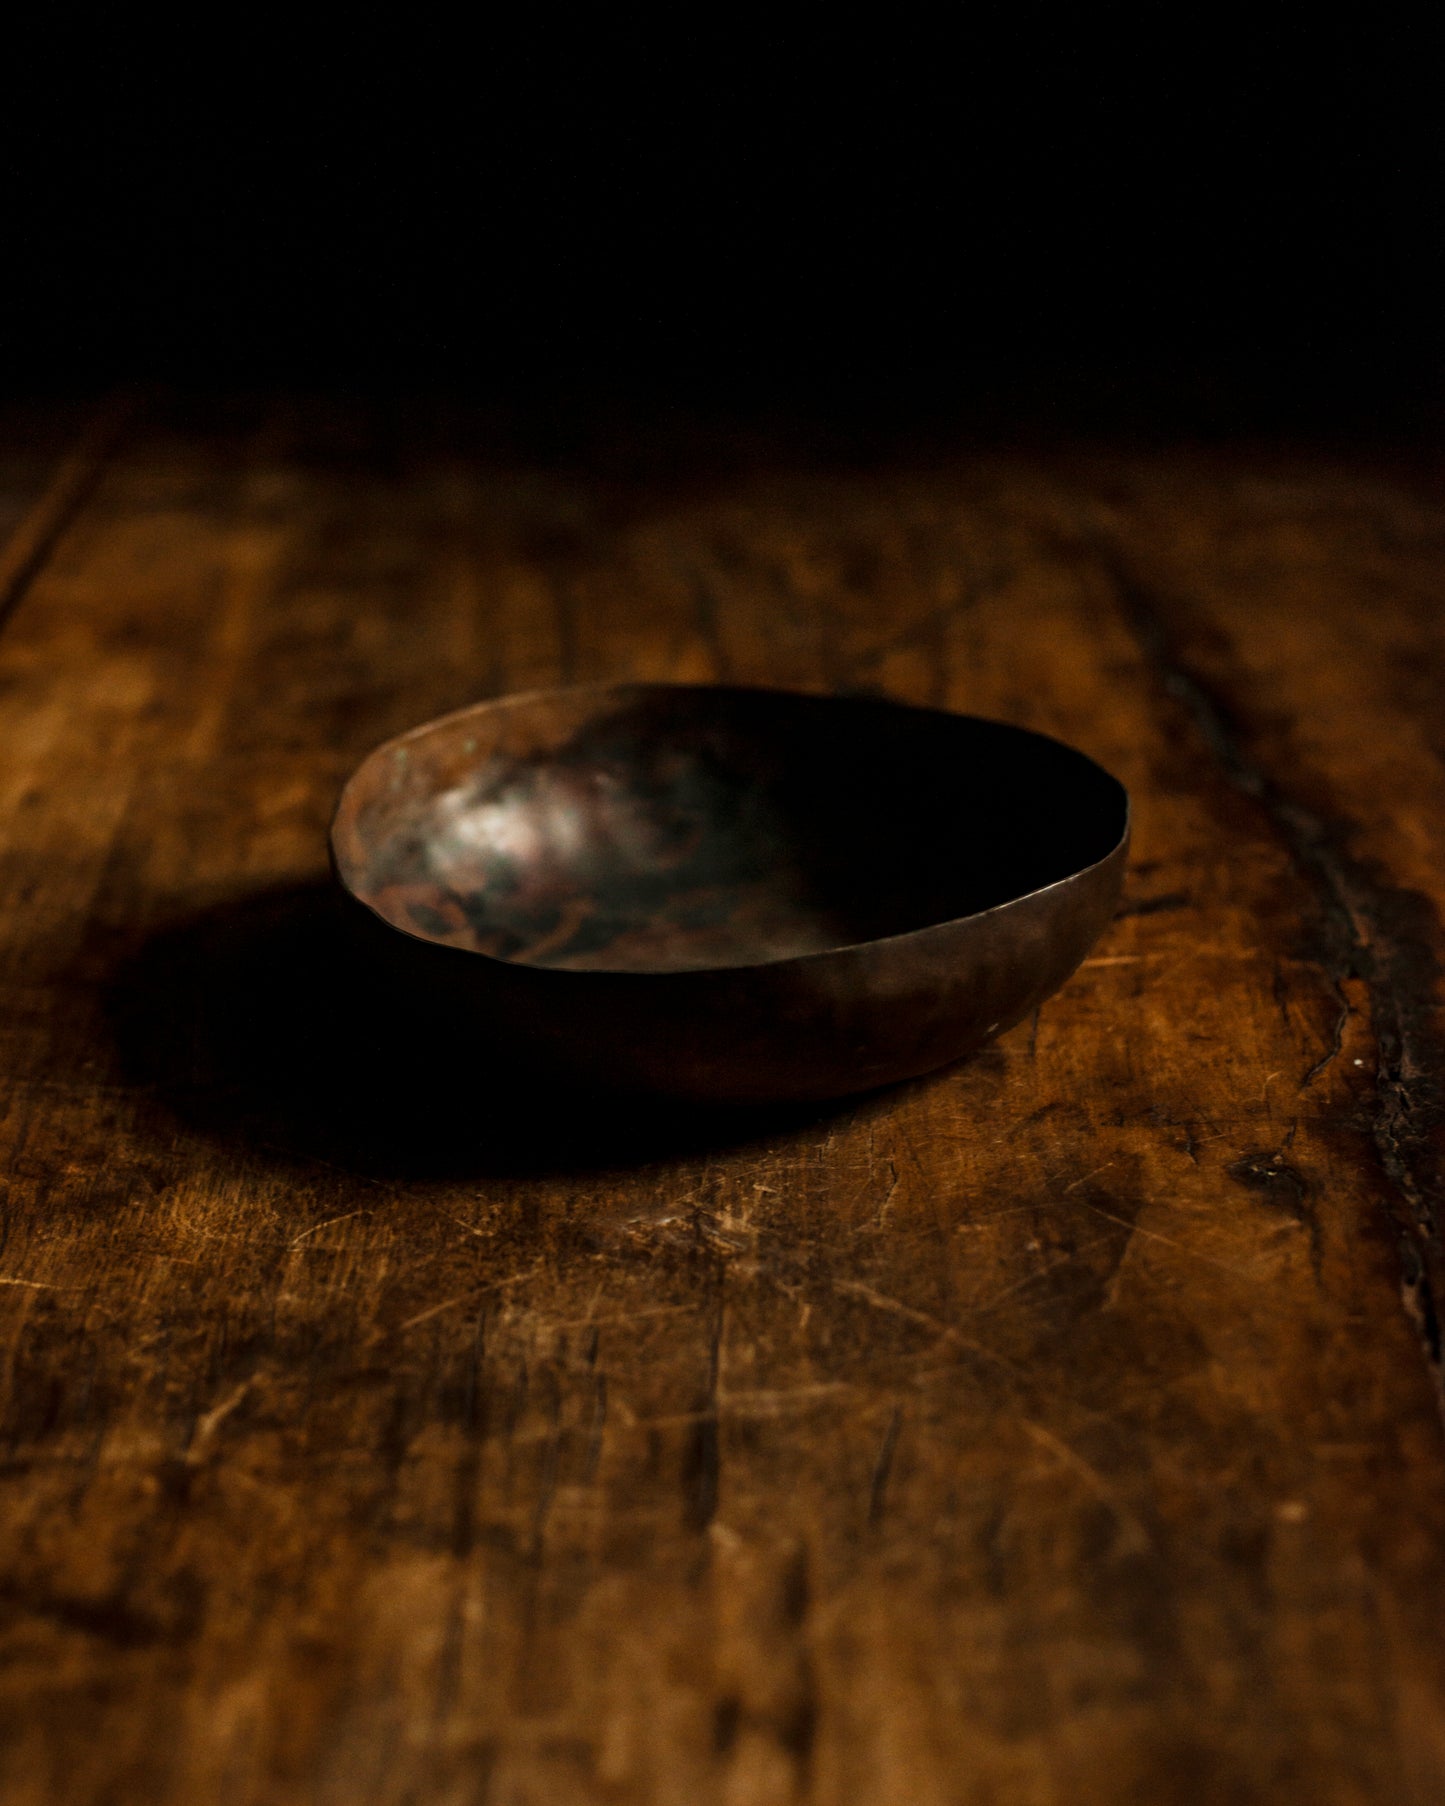 SOLID COPPER HAND WROUGHT BOWL 1700S - 1800S